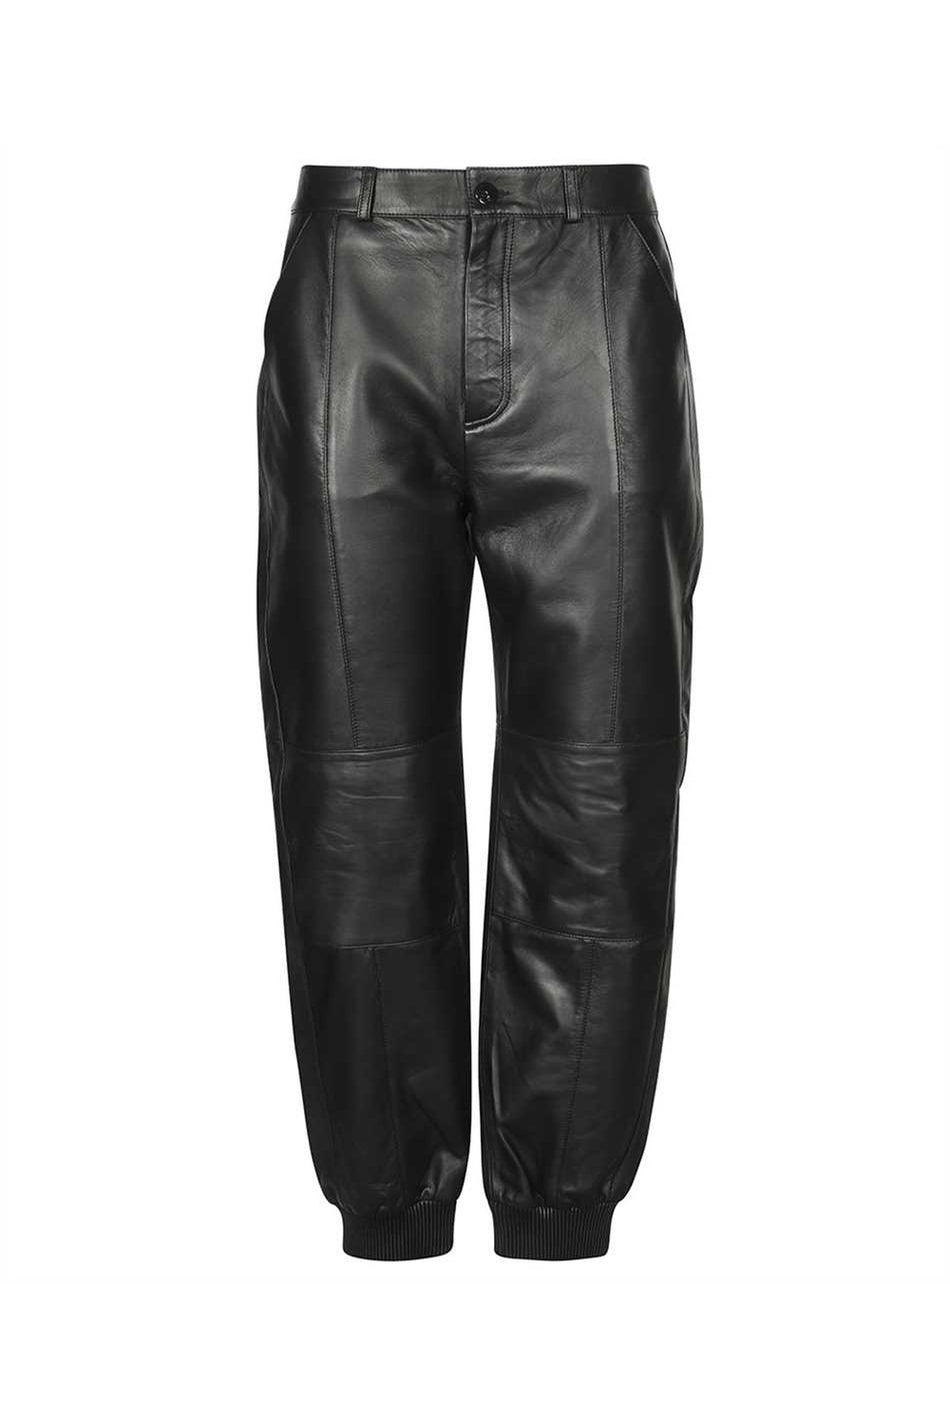 Leather pants-Karl Lagerfeld-OUTLET-SALE-38-ARCHIVIST